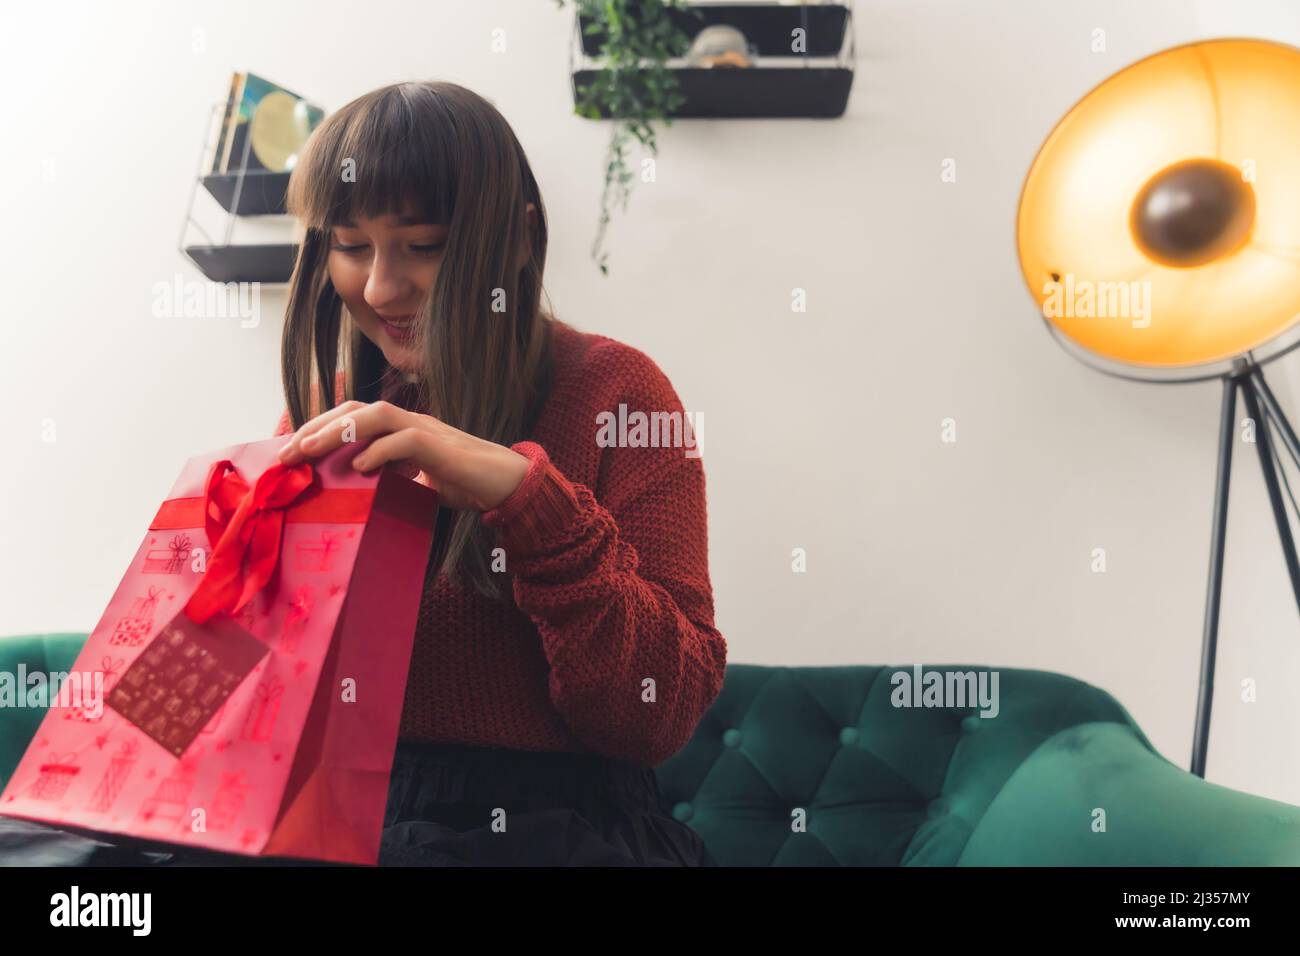 Cheerful caucasian woman in her 20s or 30s opening a present while sitting on a green sofa. Indoor shot. High quality photo Stock Photo